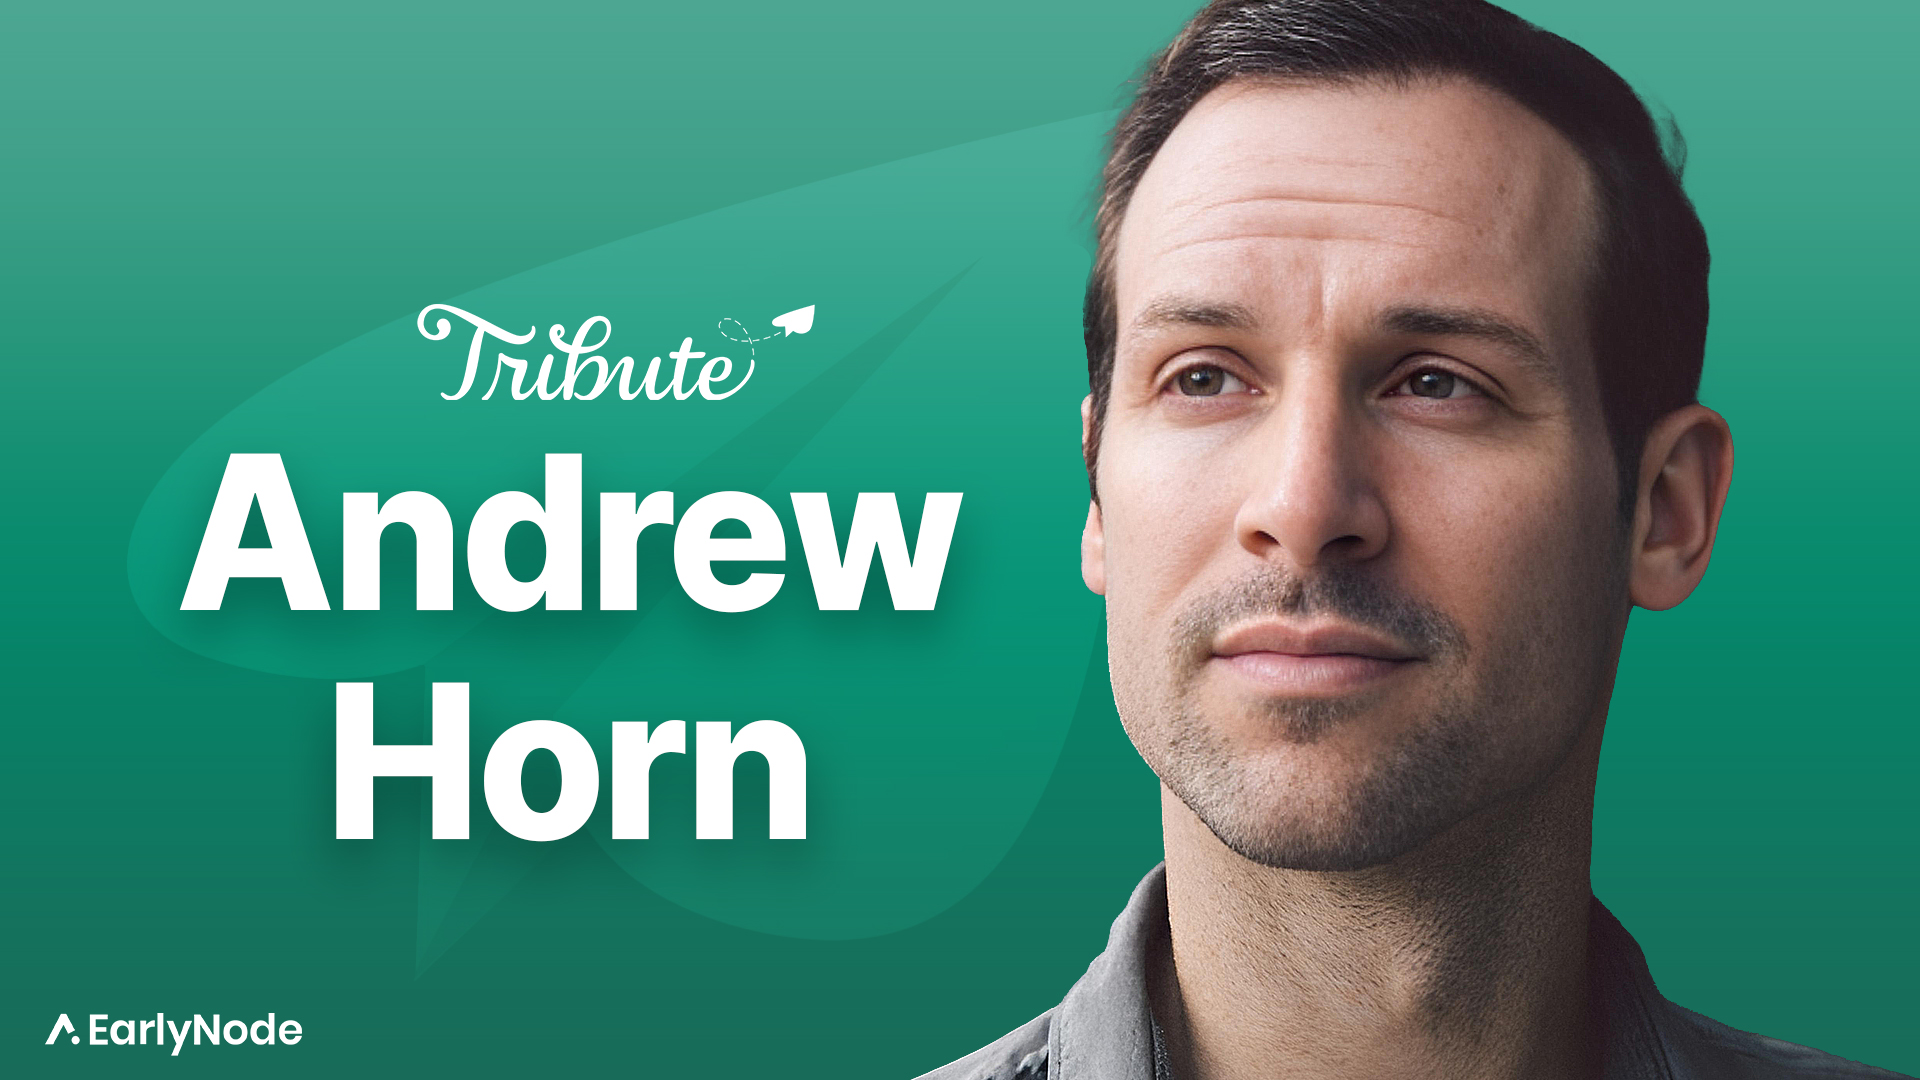 0-6M Videos Delivered, How Andrew Horn Grew Tribute to Help Companies Cultivate Appreciation